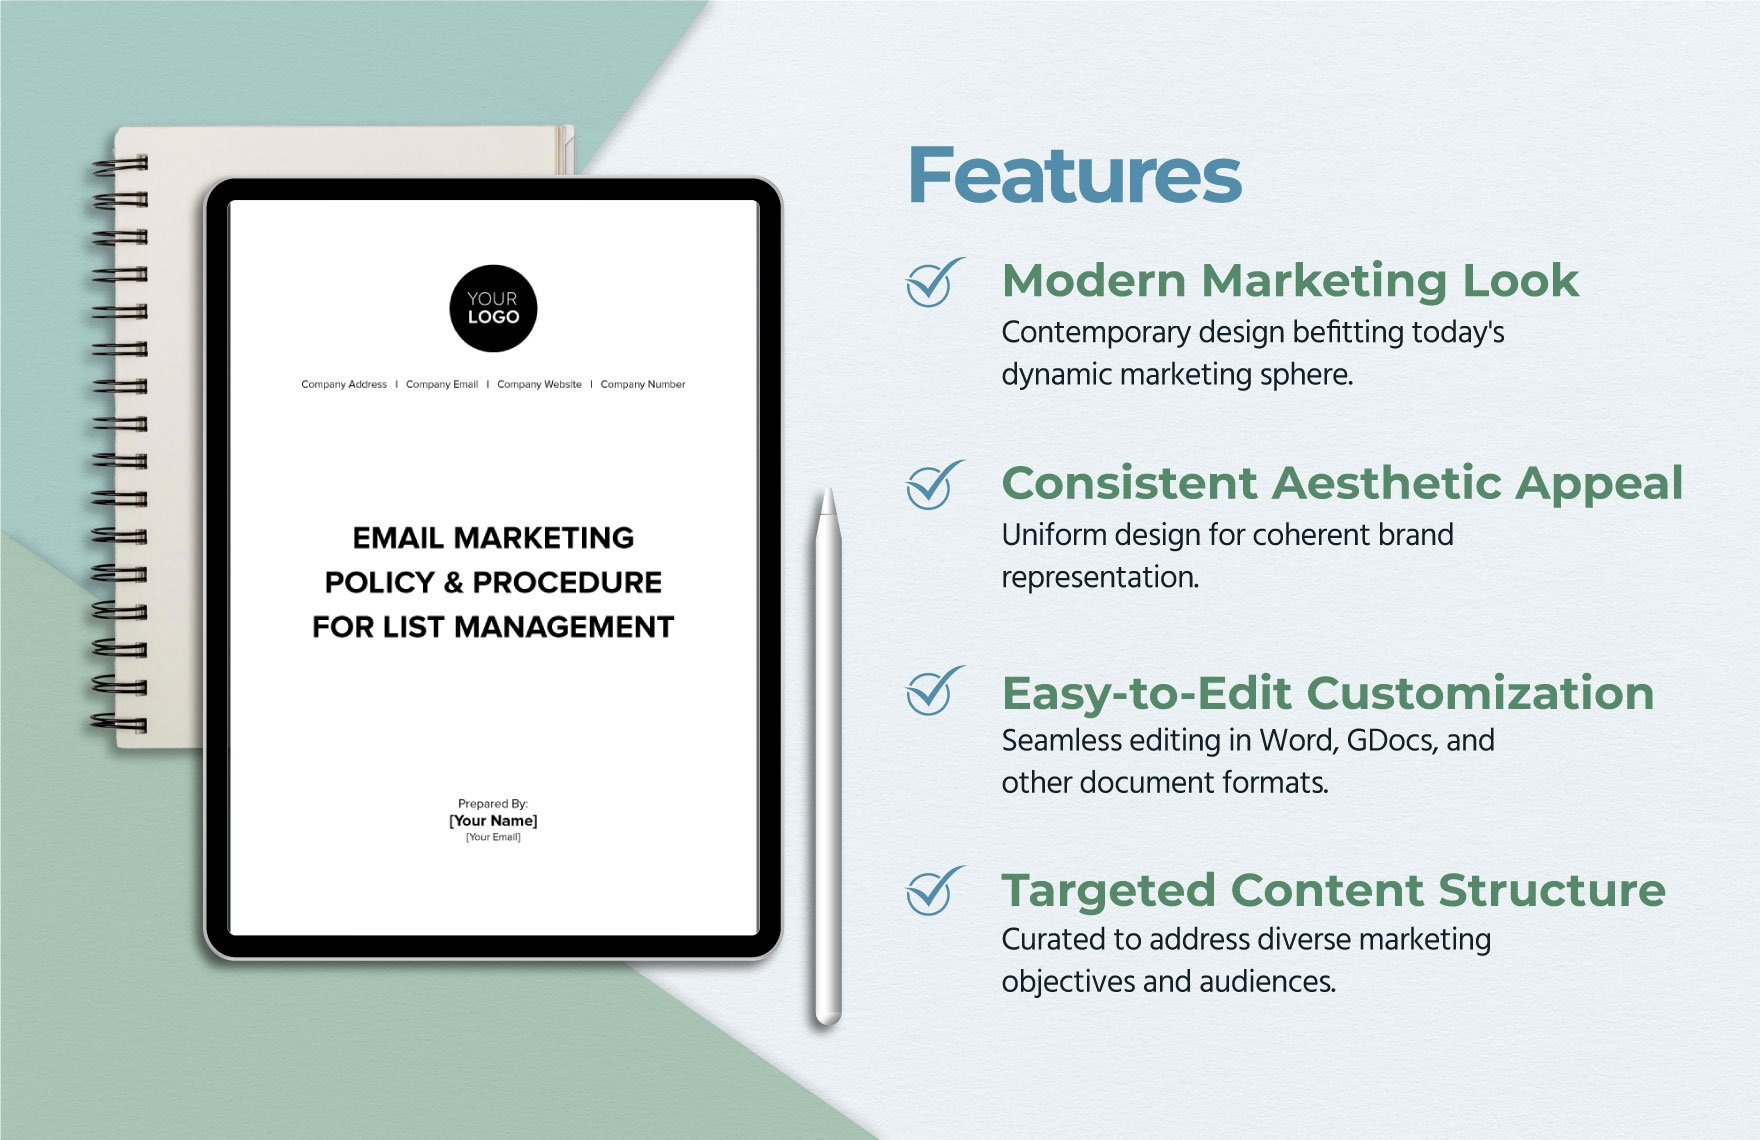 Email Marketing Policy & Procedure for List Management Template